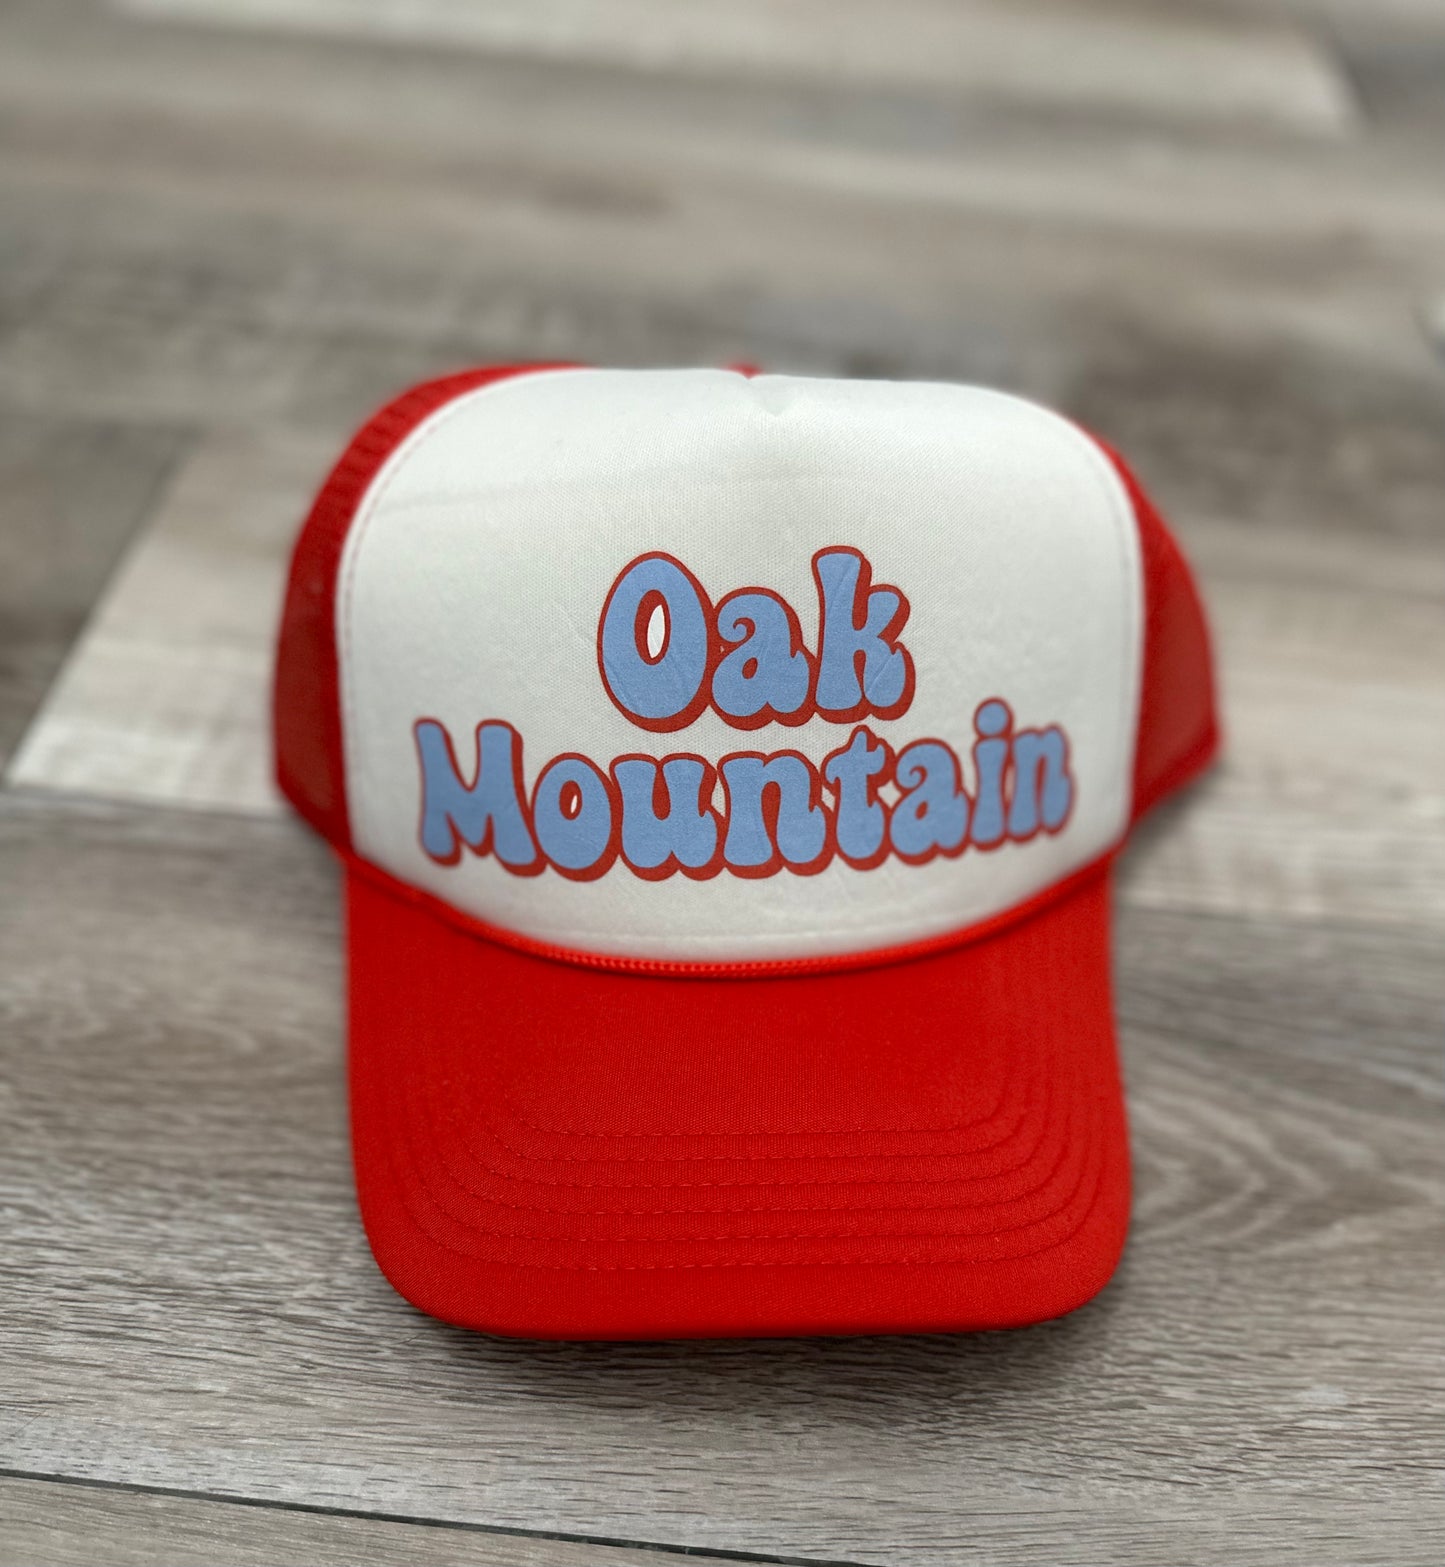 Not Just your average Trucker Hat